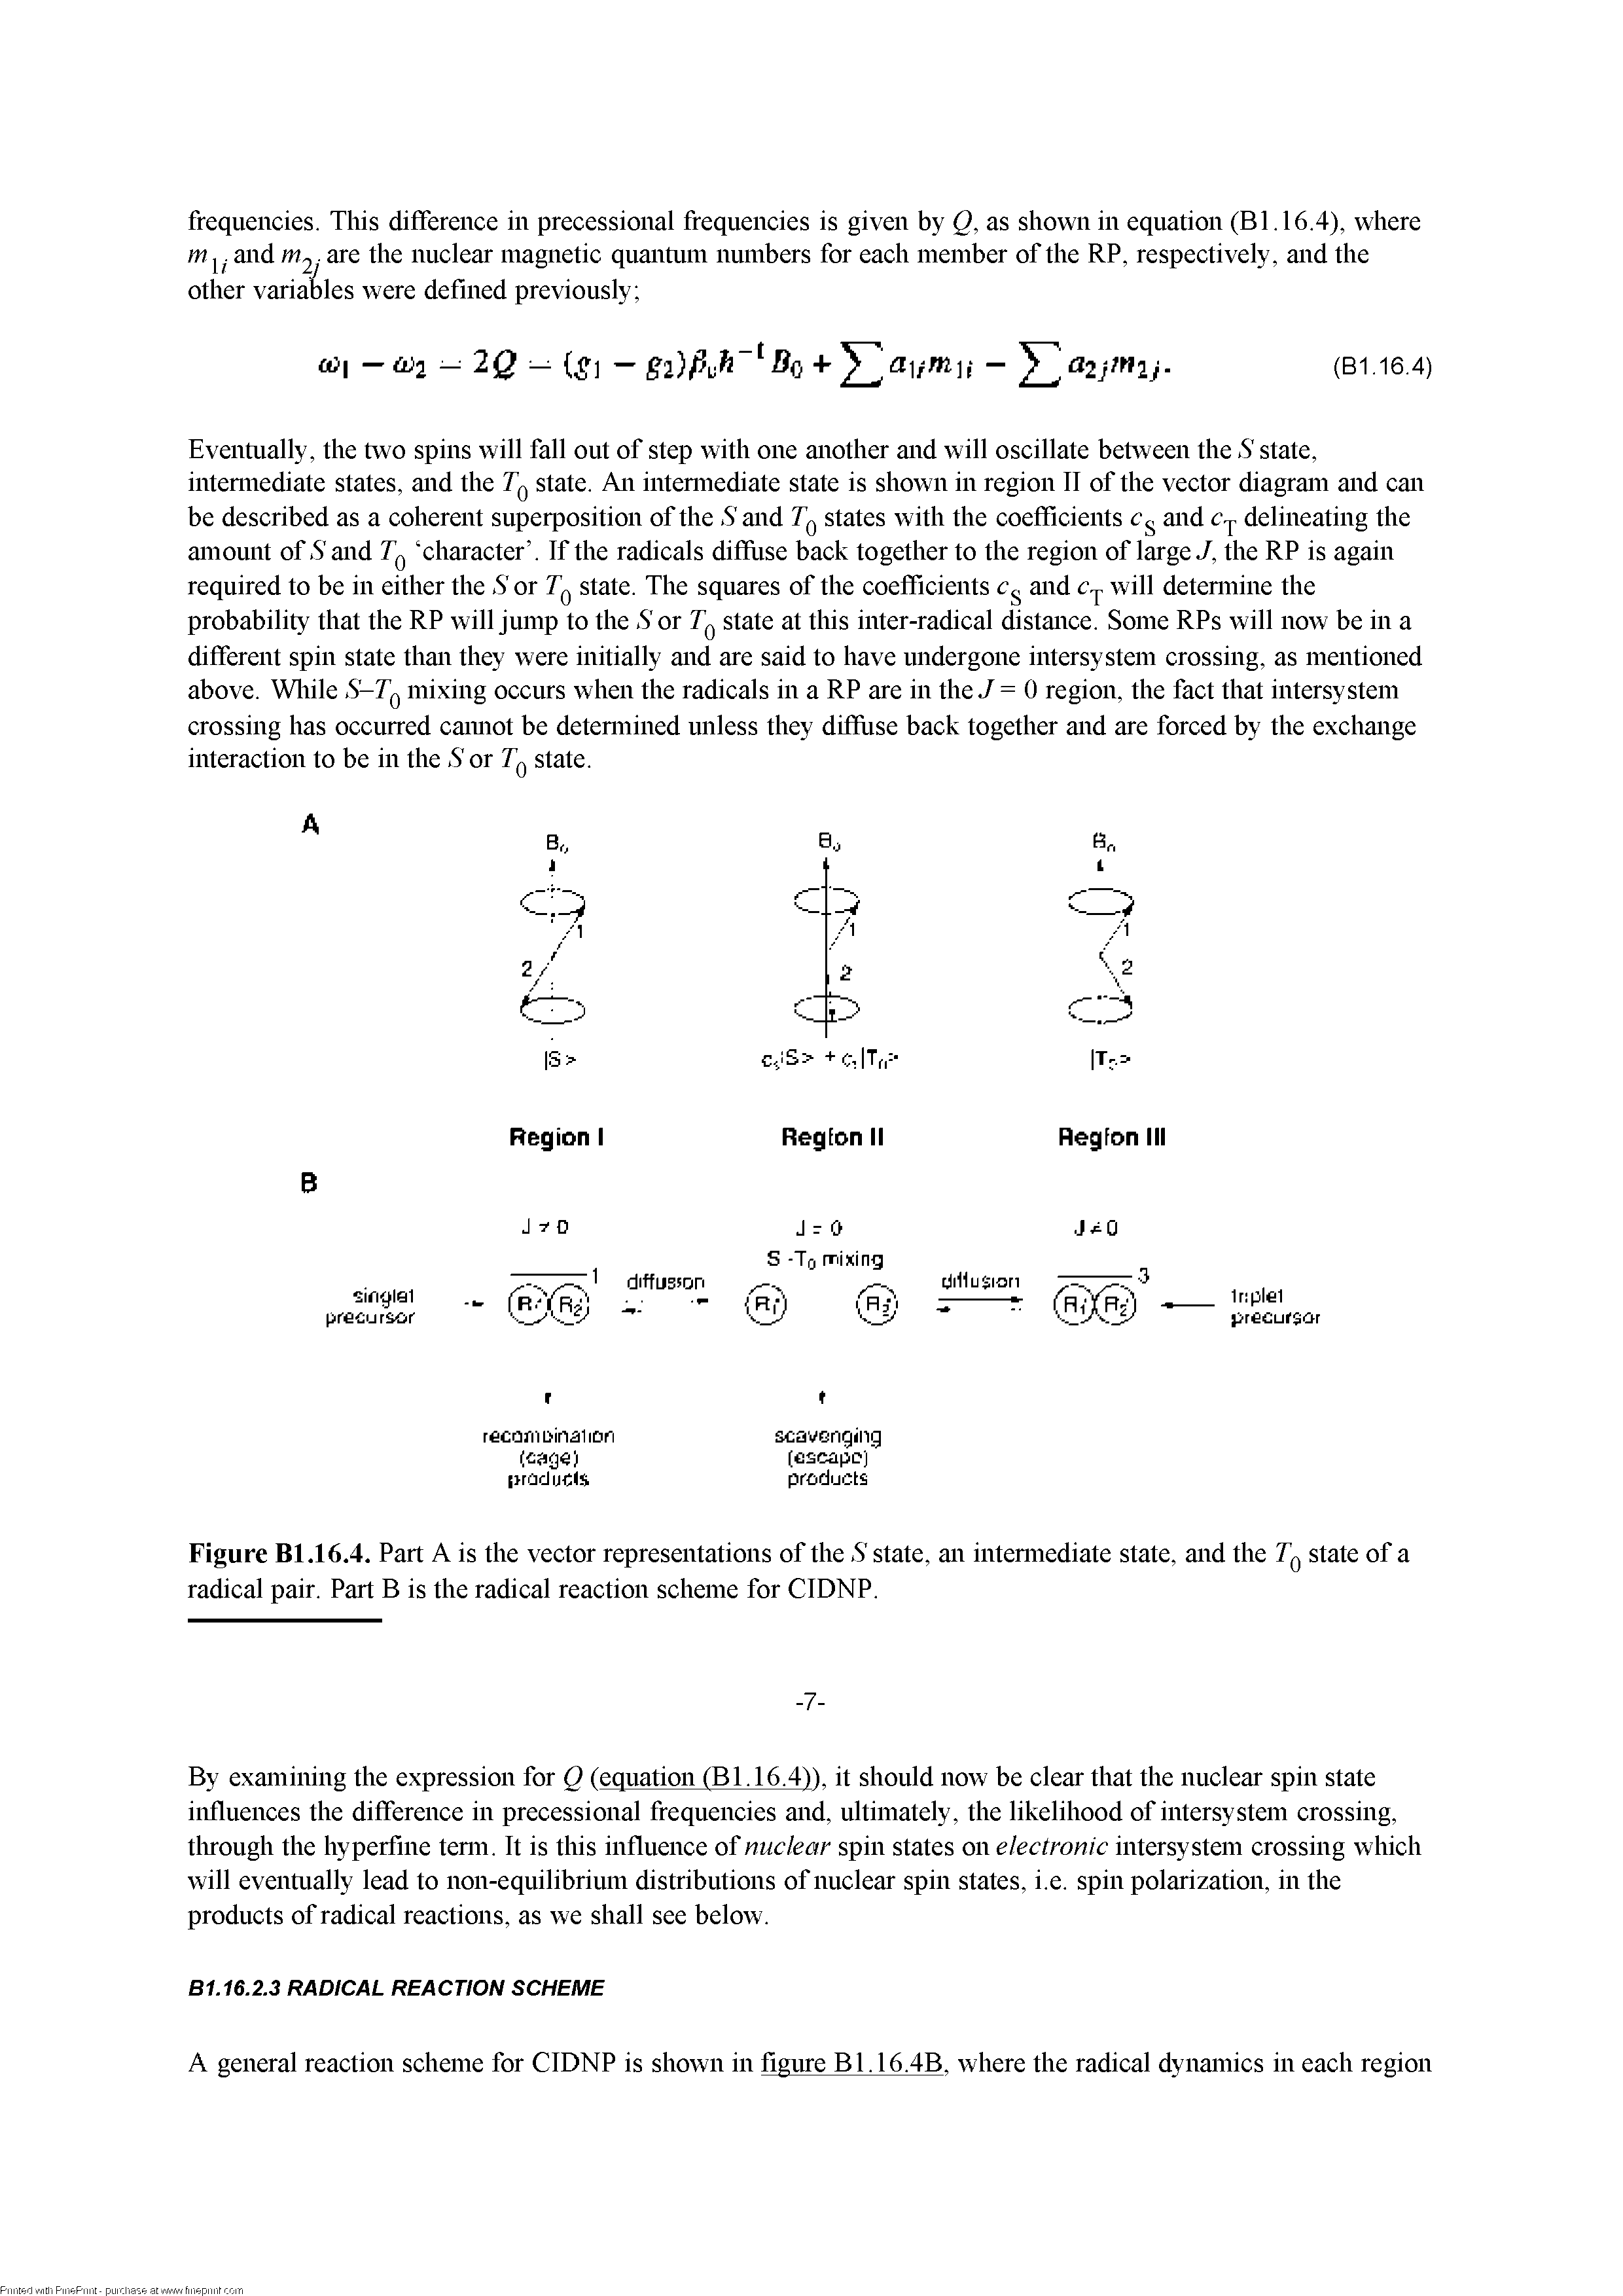 Figure Bl.16.4. Part A is the vector representations of the. S state, an intennediate state, and the Jq state of a radical pair. Part B is the radical reaction scheme for CIDNP.